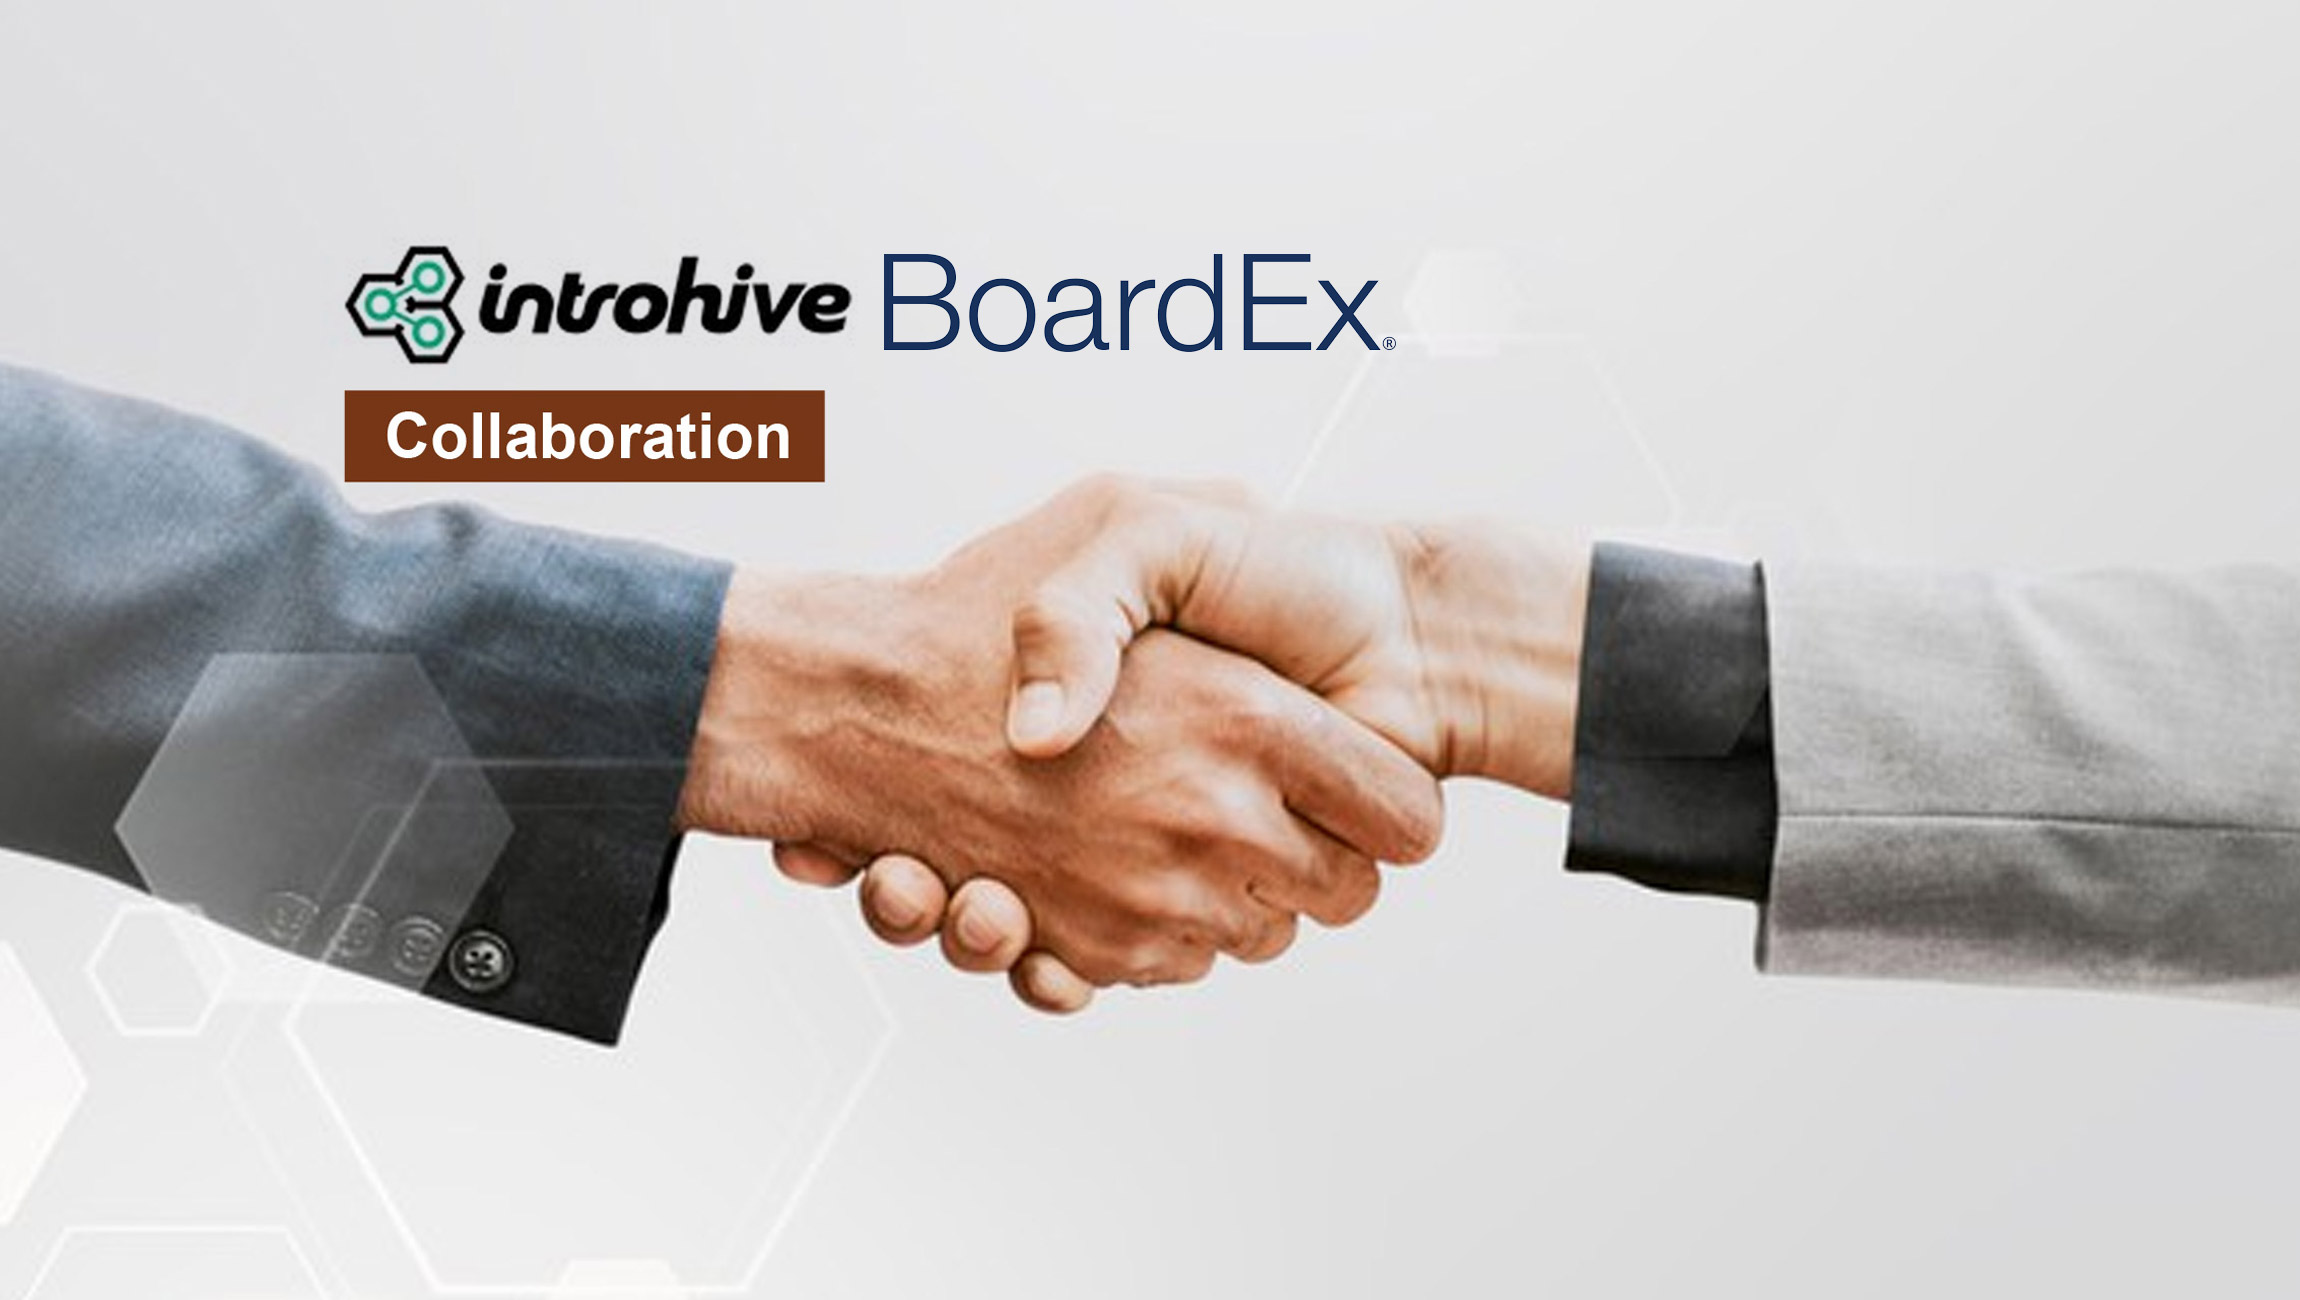 Introhive-and-BoardEx-Announce-Collaborative-Partnership-to-Support-Shared-Clients